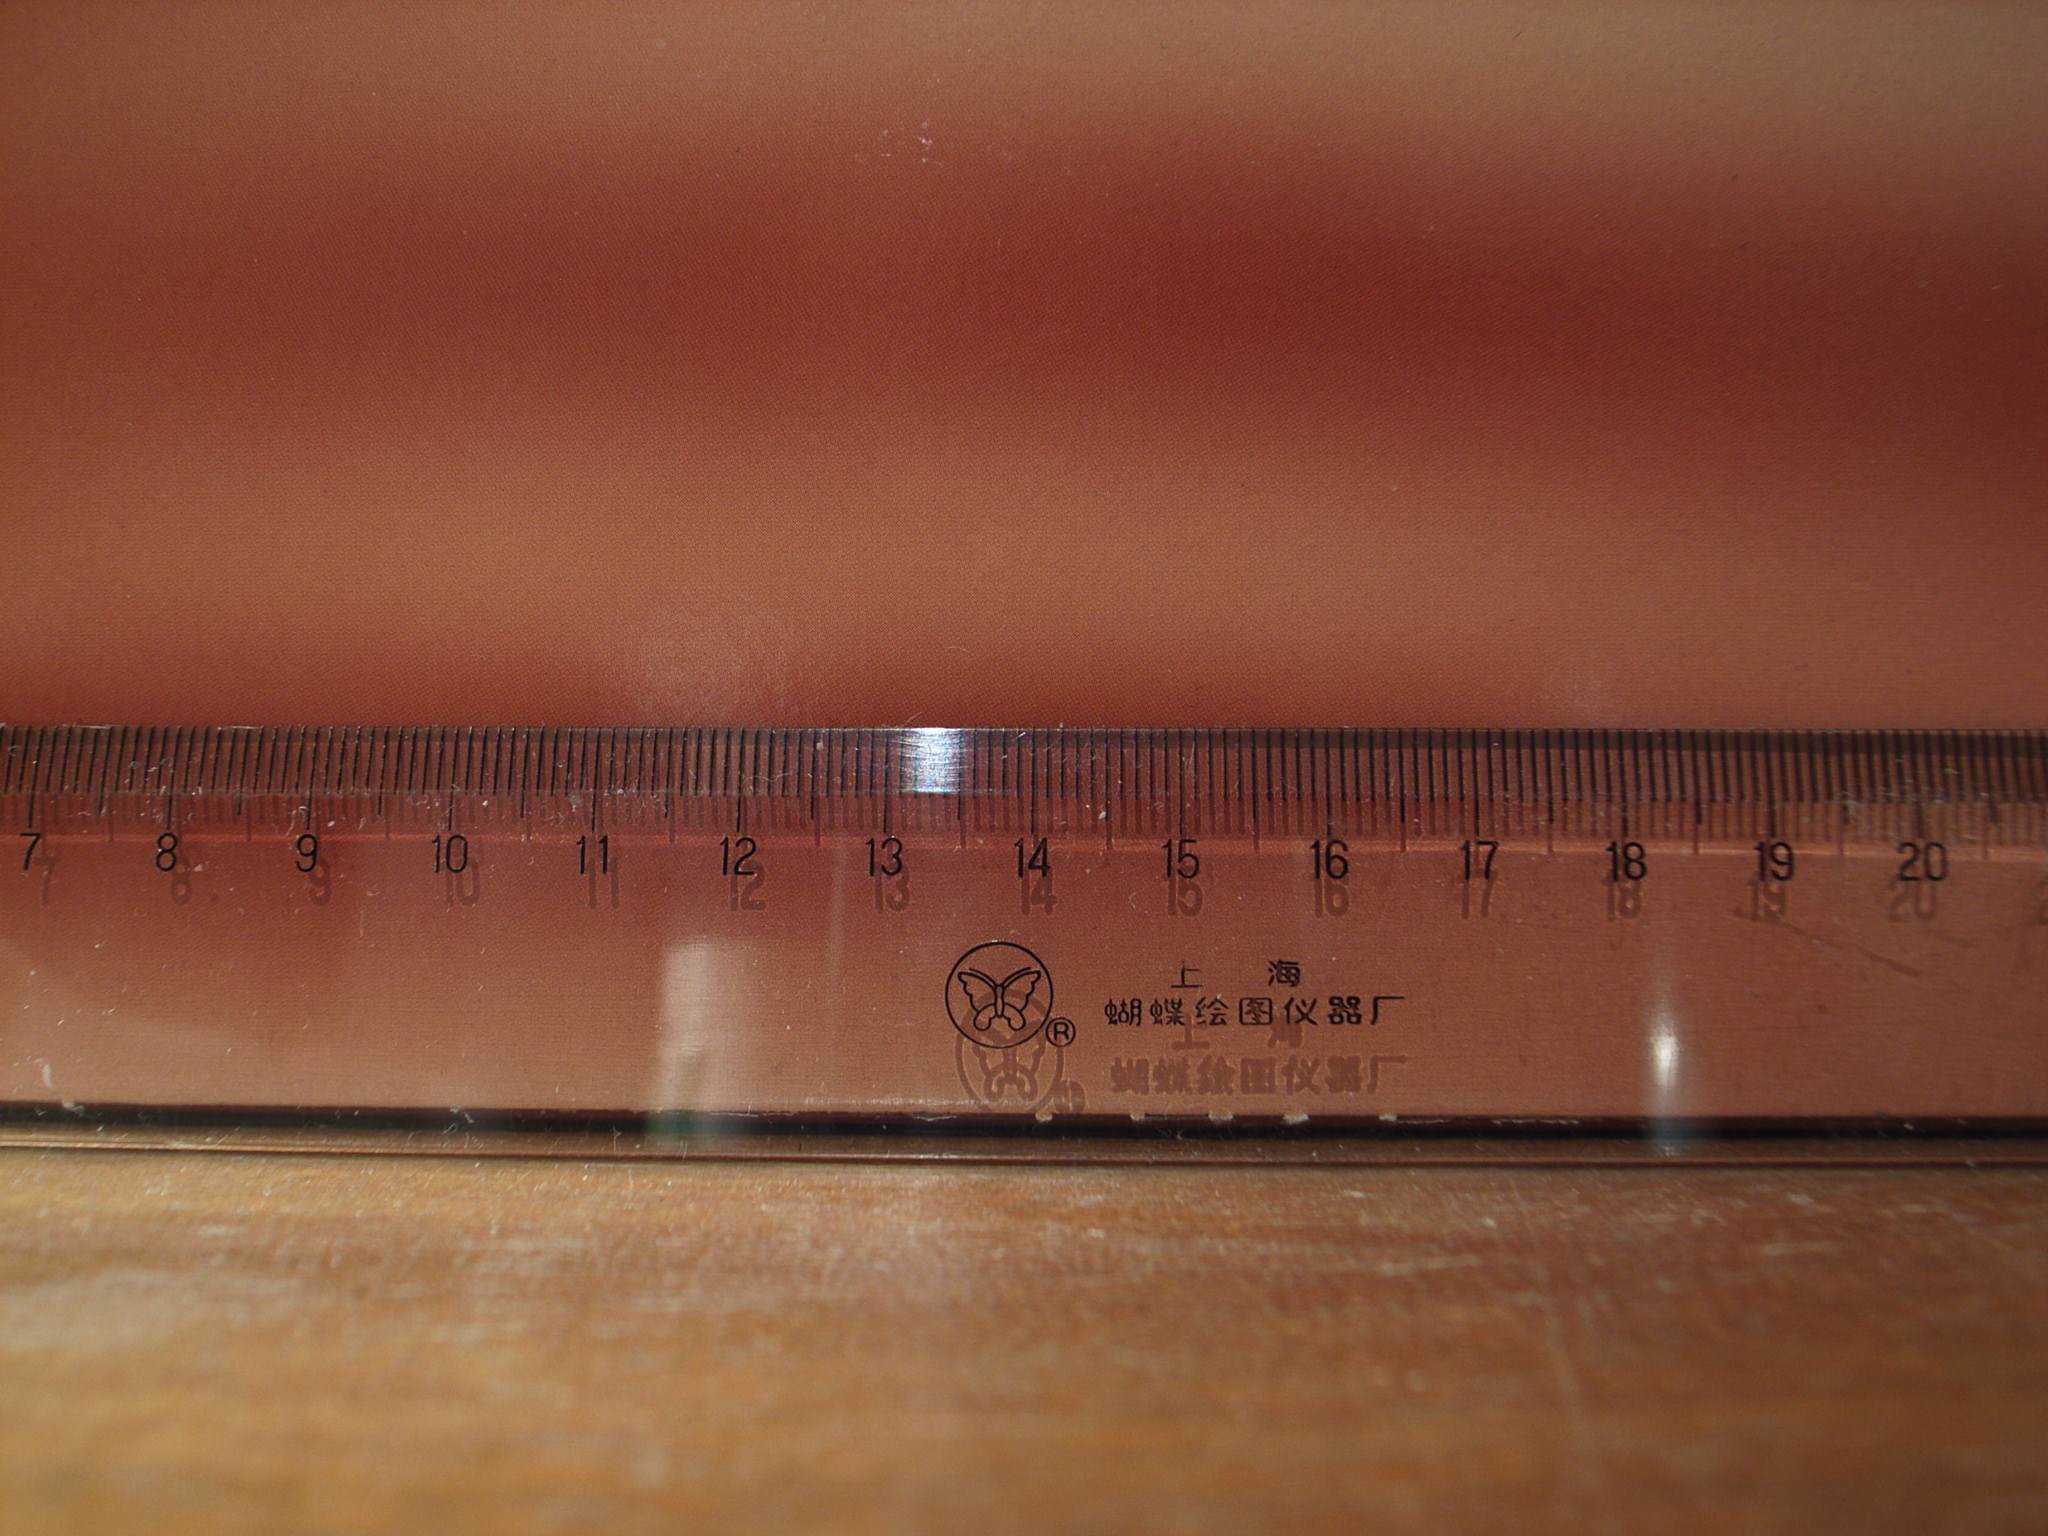 the ruler is very sharp on the surface